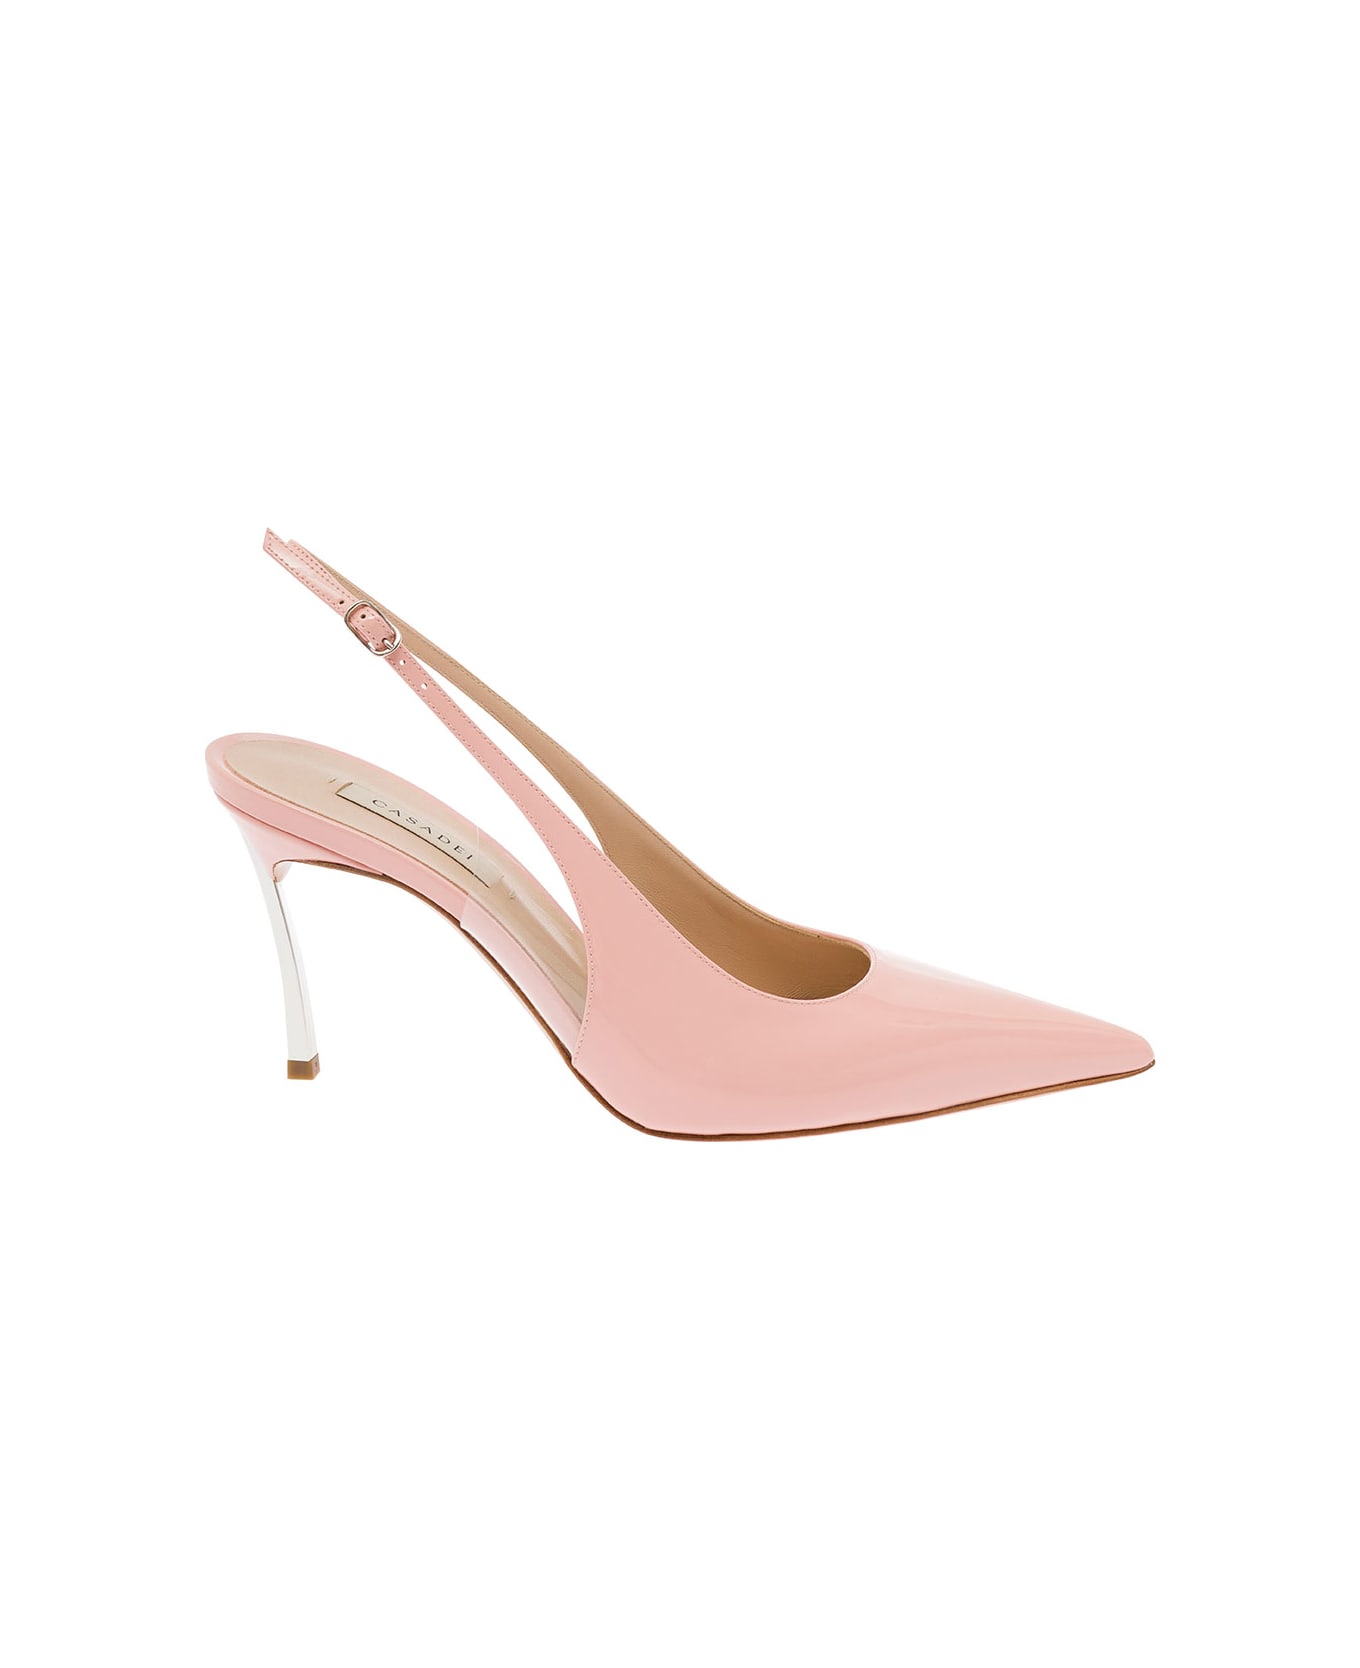 Casadei Pink Slingback Pumps With Blade Heel In Patent Leather Woman - Pink